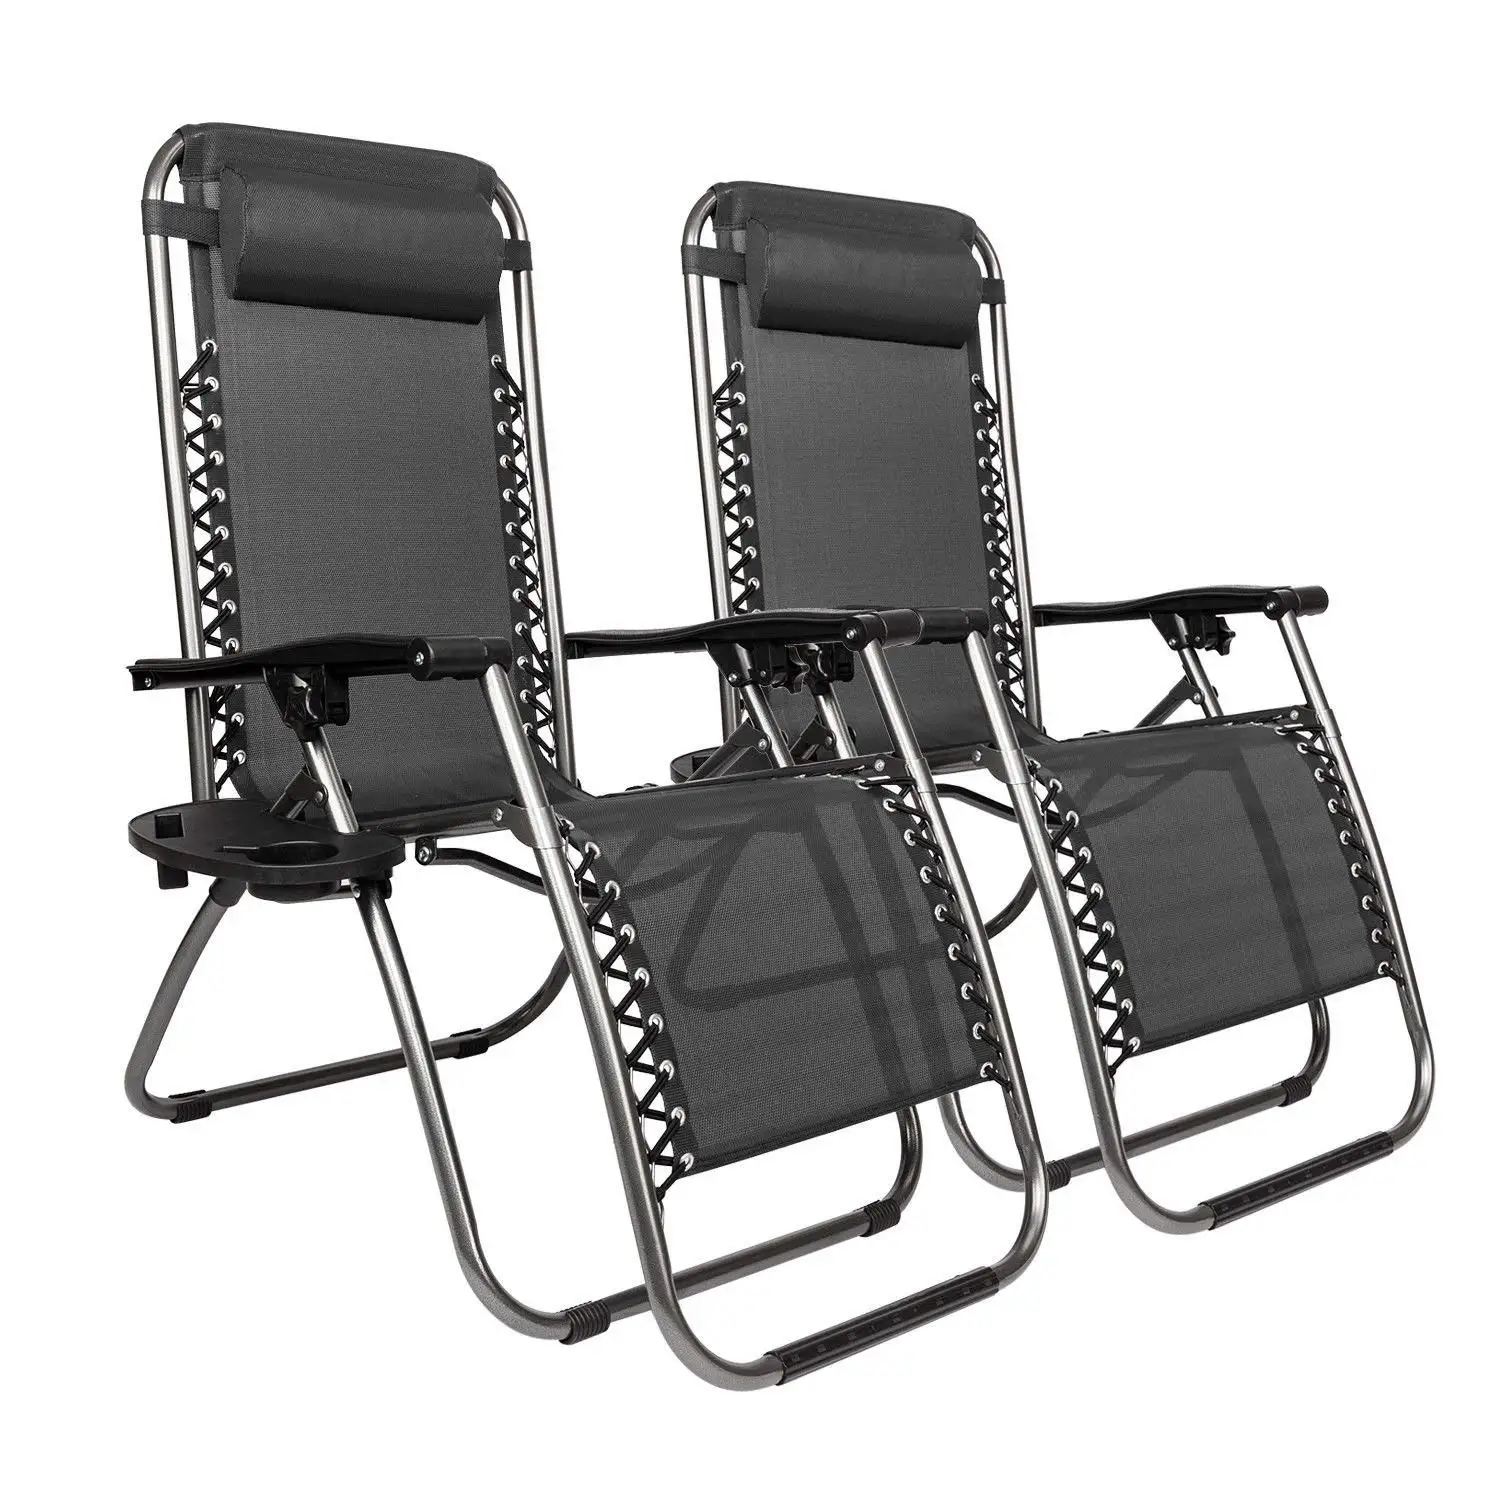 Cheap Anti Gravity Recliner Find Anti Gravity Recliner Deals On